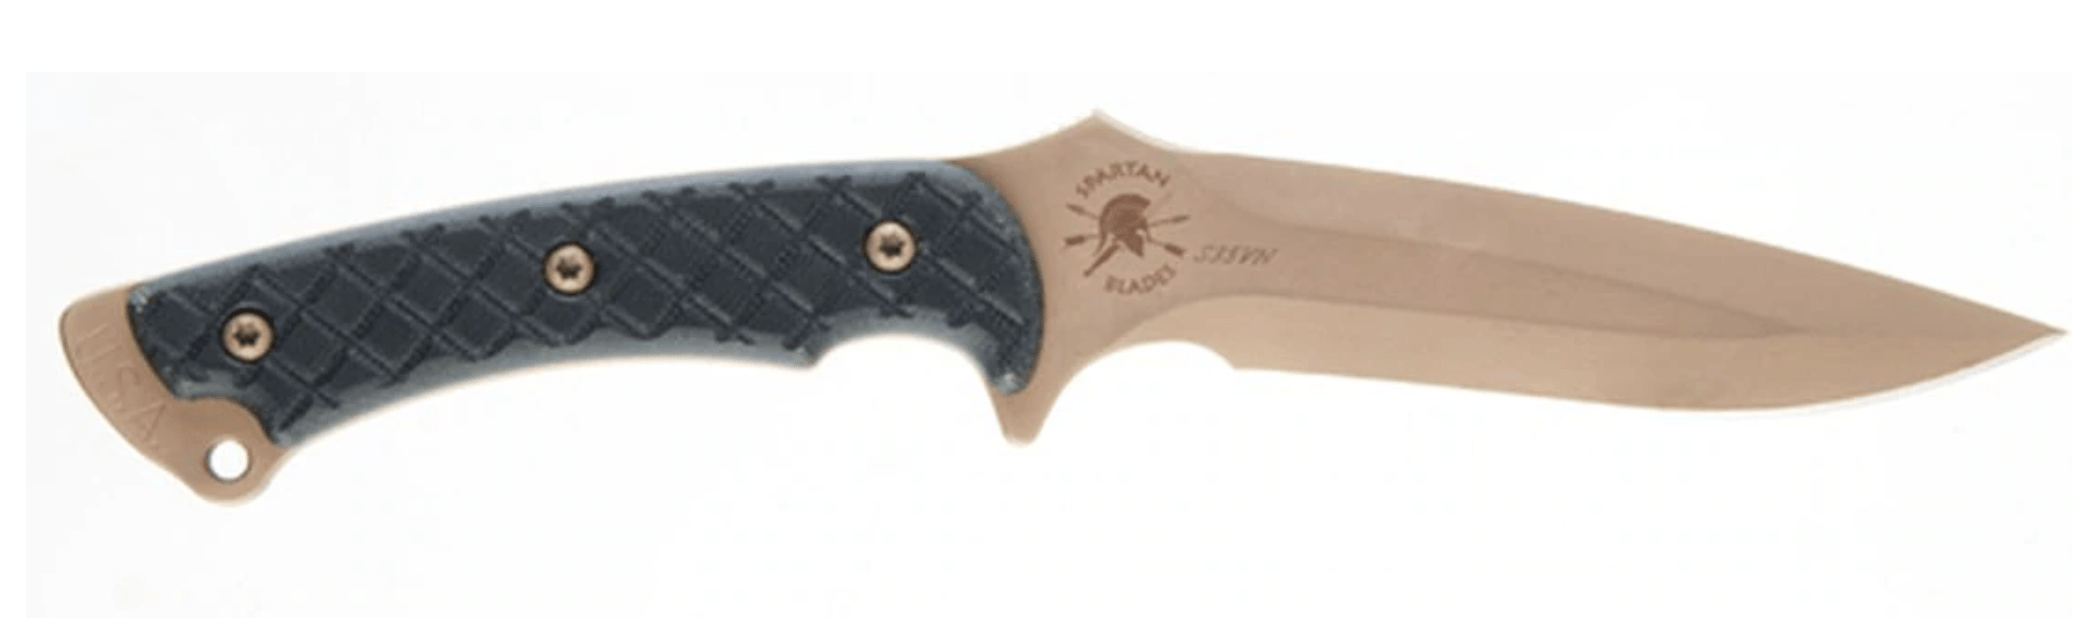 The grooved Micarta handle gives the Ares a narrow profile while enabling a vise-like grip.